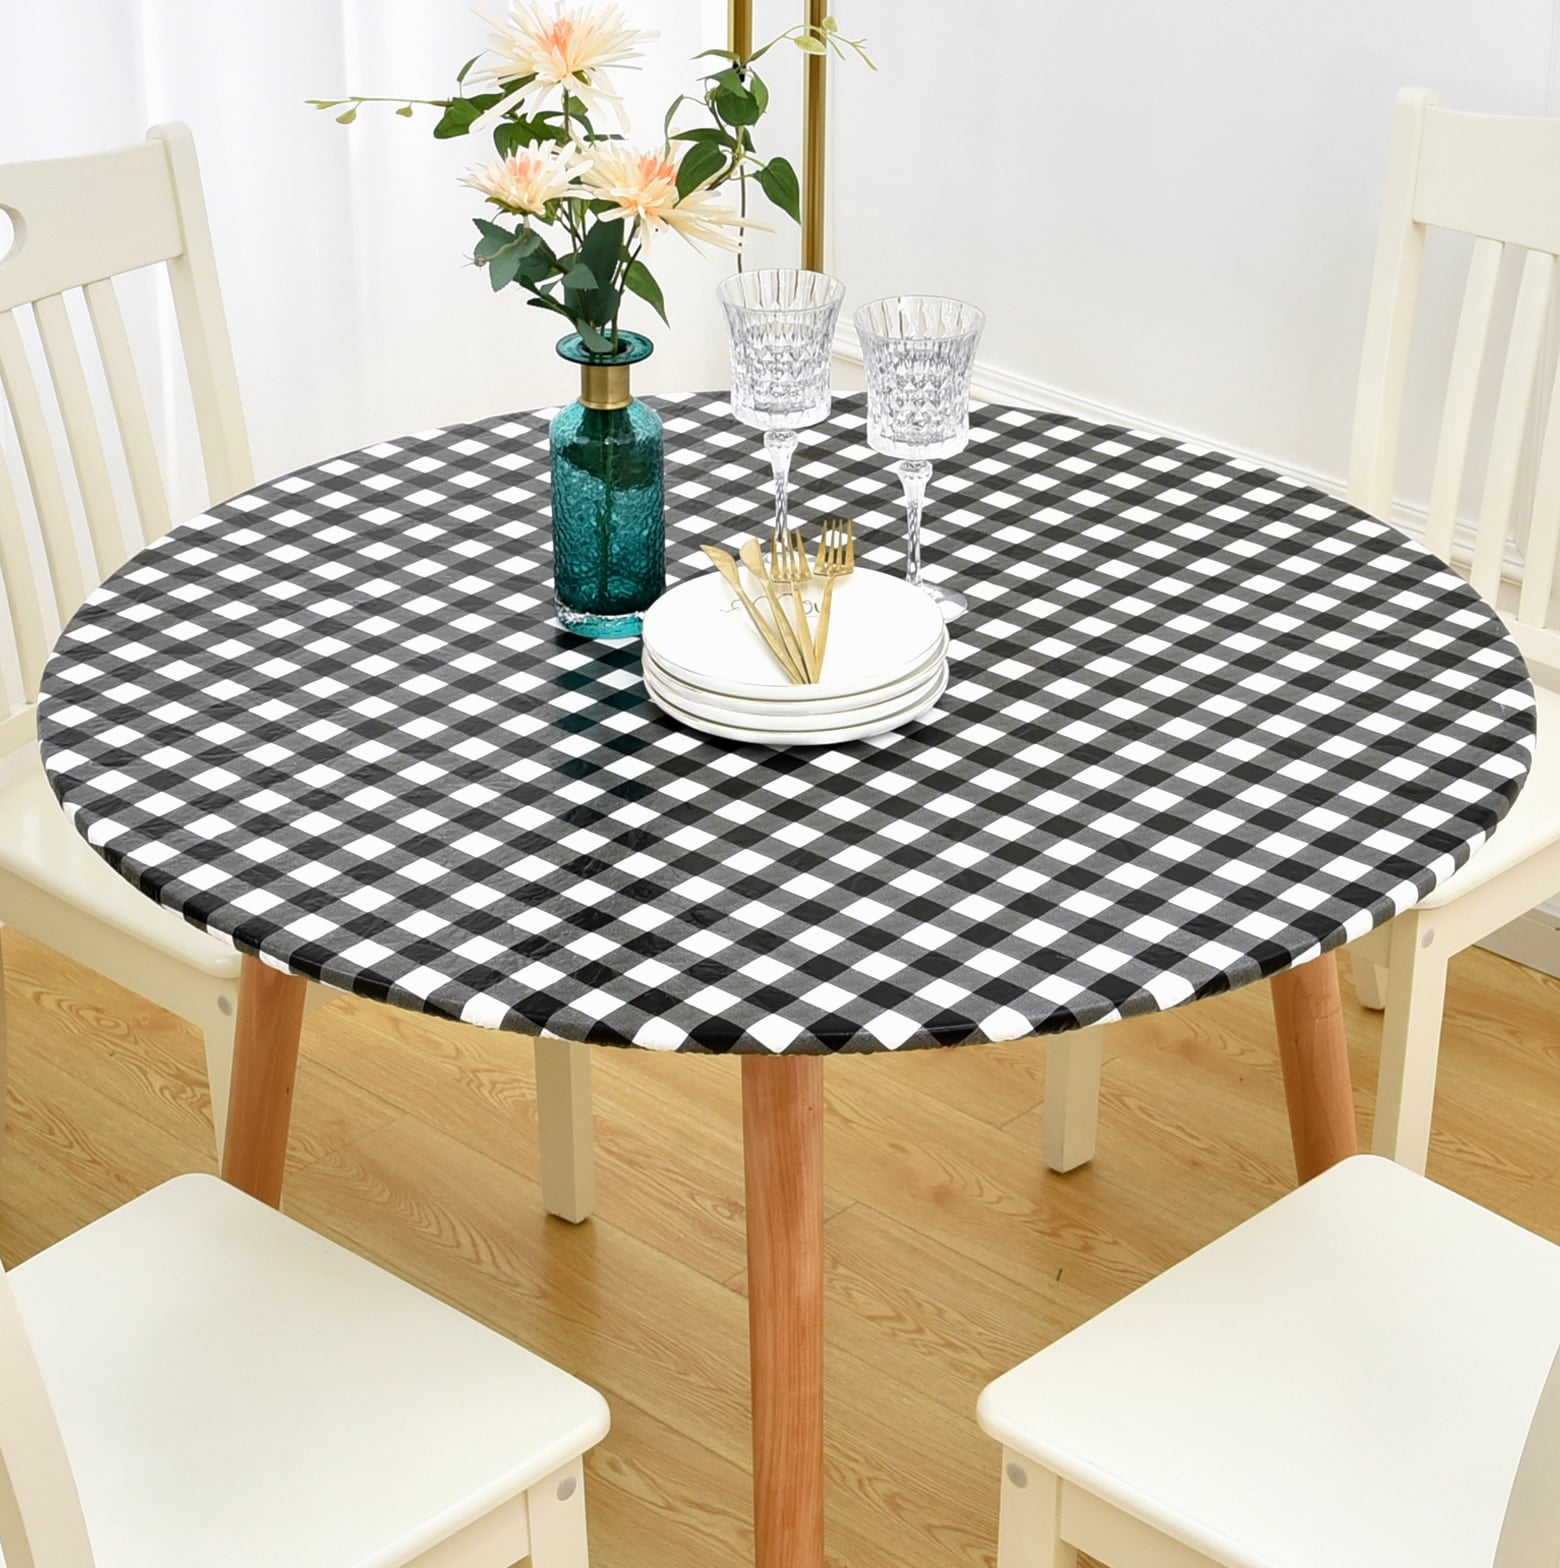 Rally Home Goods Indoor Outdoor Patio Round Fitted Vinyl Tablecloth,  Flannel Backing, Elastic Edge, Waterproof Wipeable Cover, Black/White  Gingham Plaid Check Plastic for 5-Seat Table of 36-42'' Diam - Walmart.com